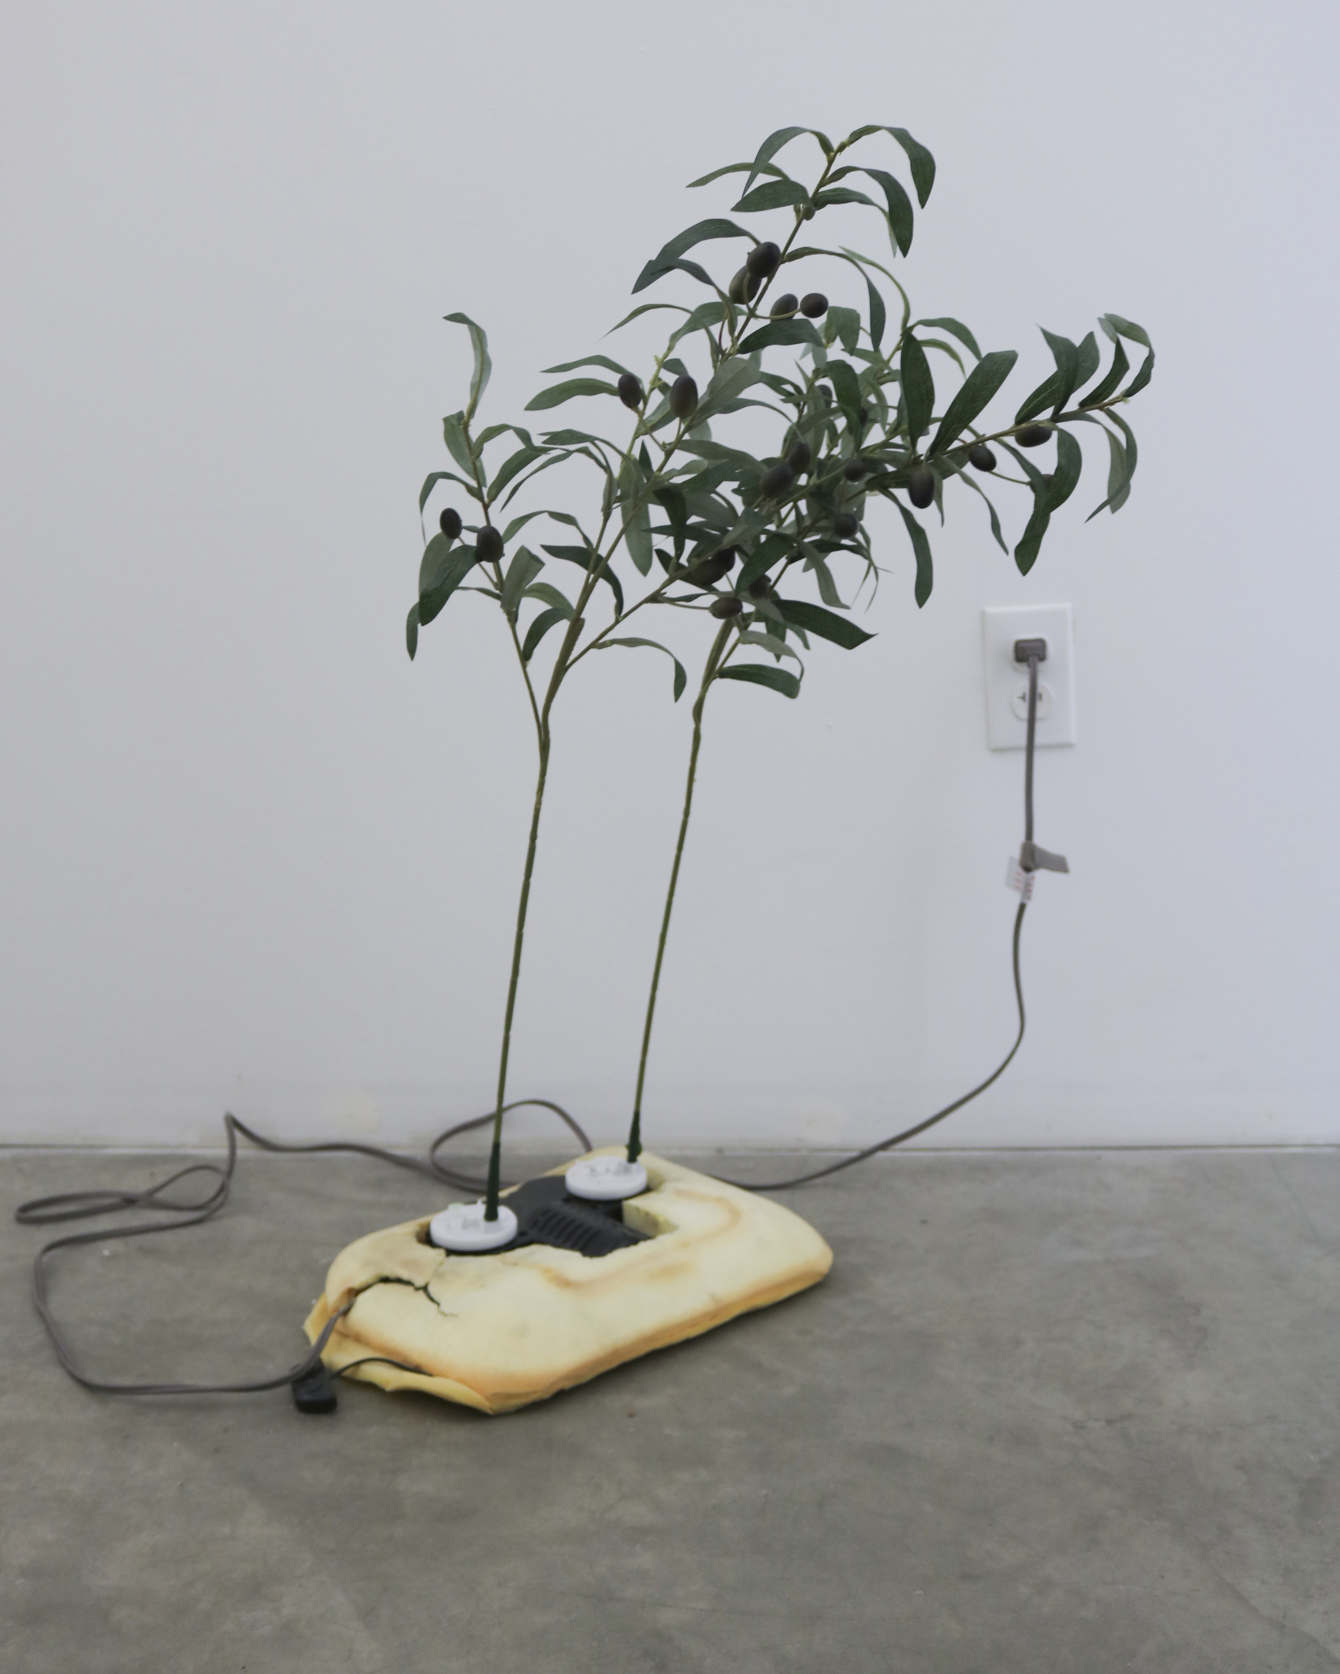 Rachel Youn, Adulators, 2019. Shiatsu foot massager and artificial olive branches. Photo courtesy of the artist.